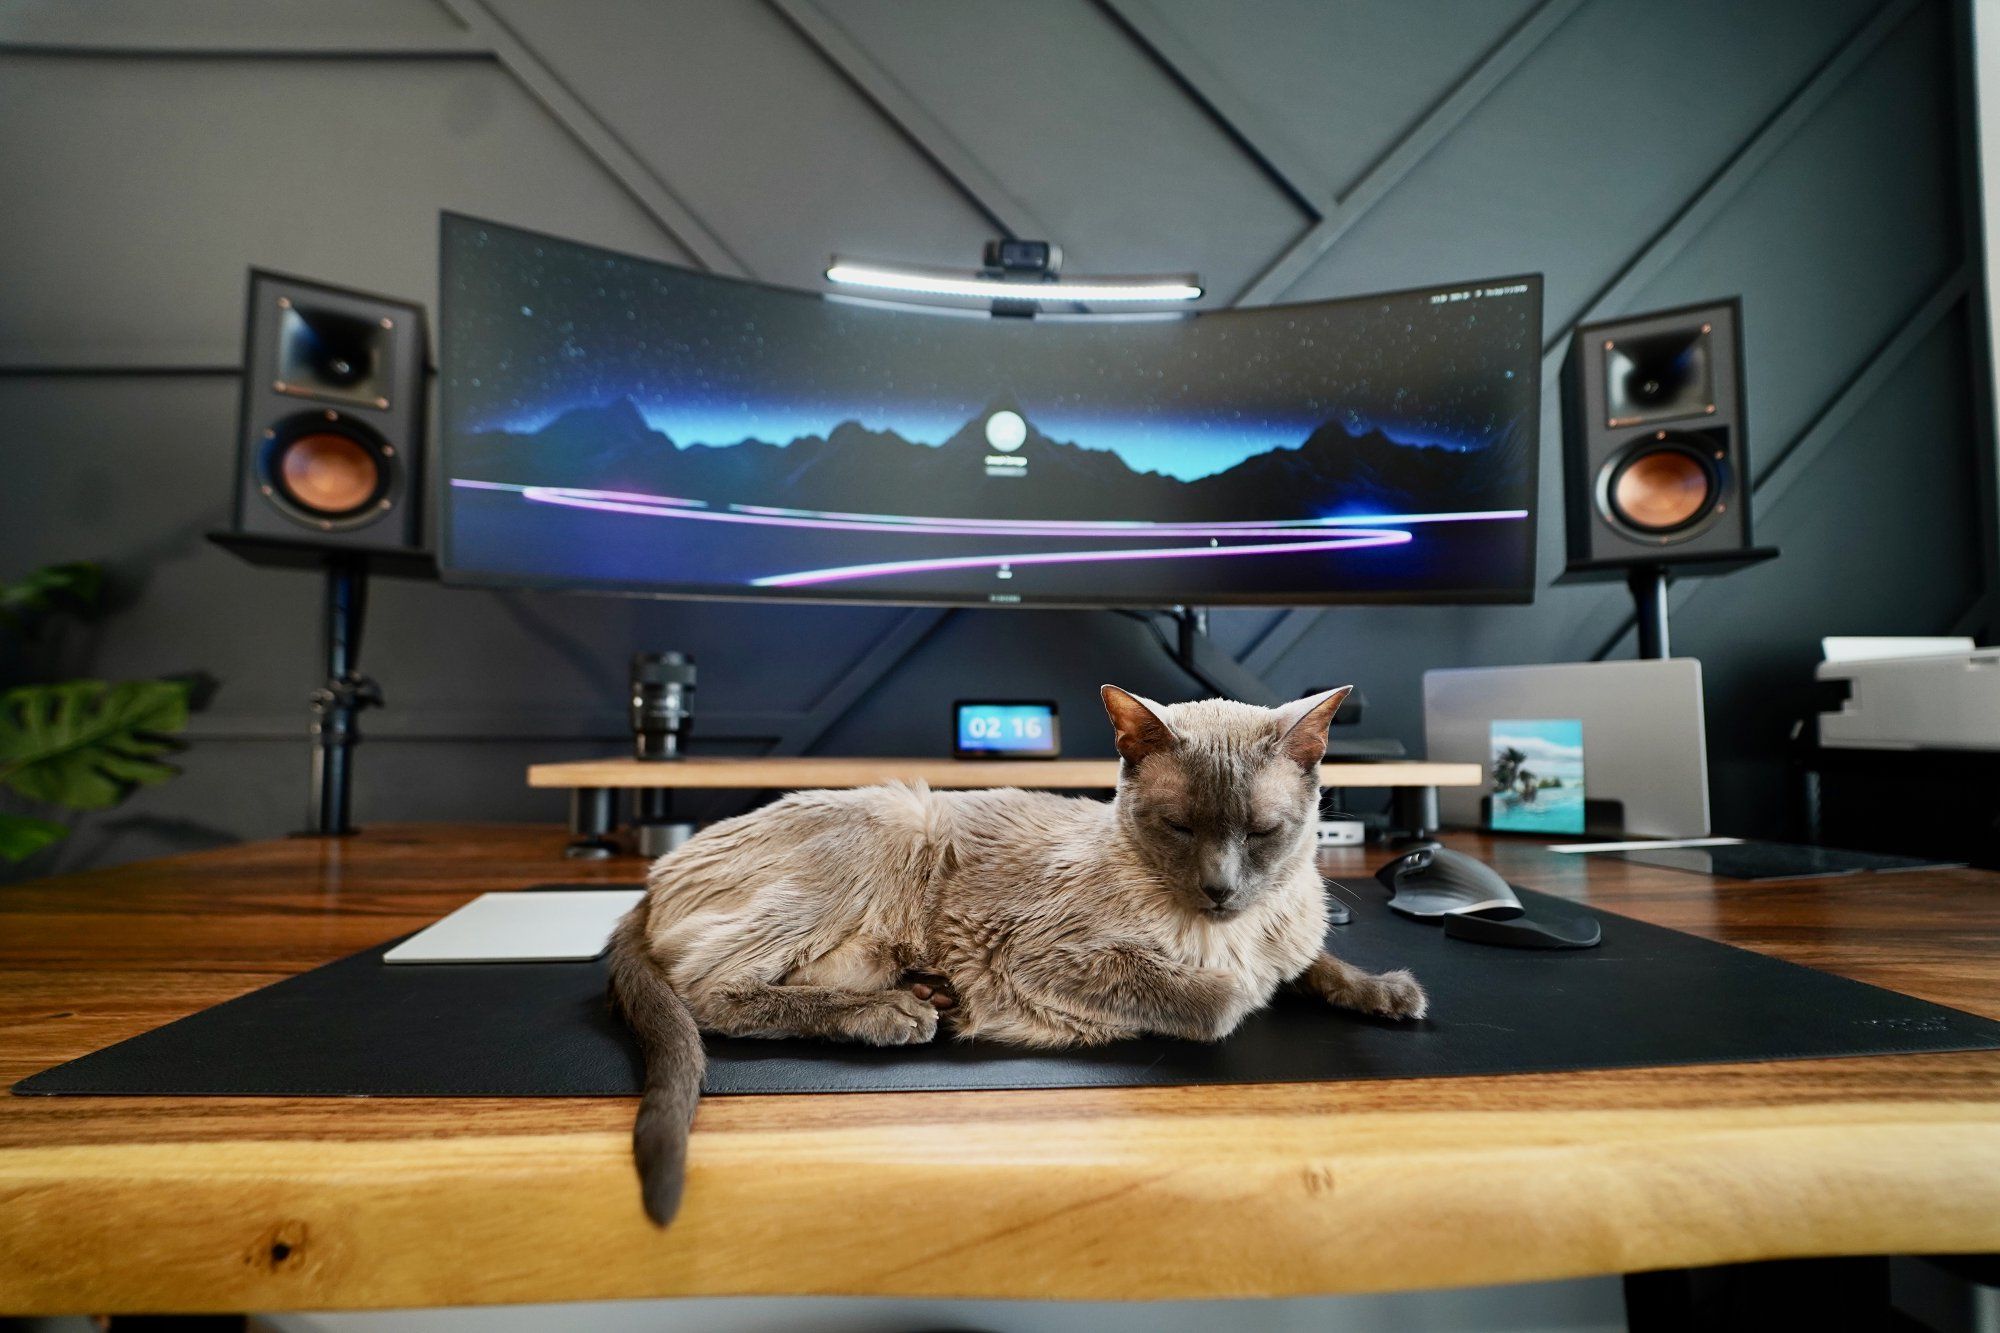 A Burmese cat lying on the desk in a home office